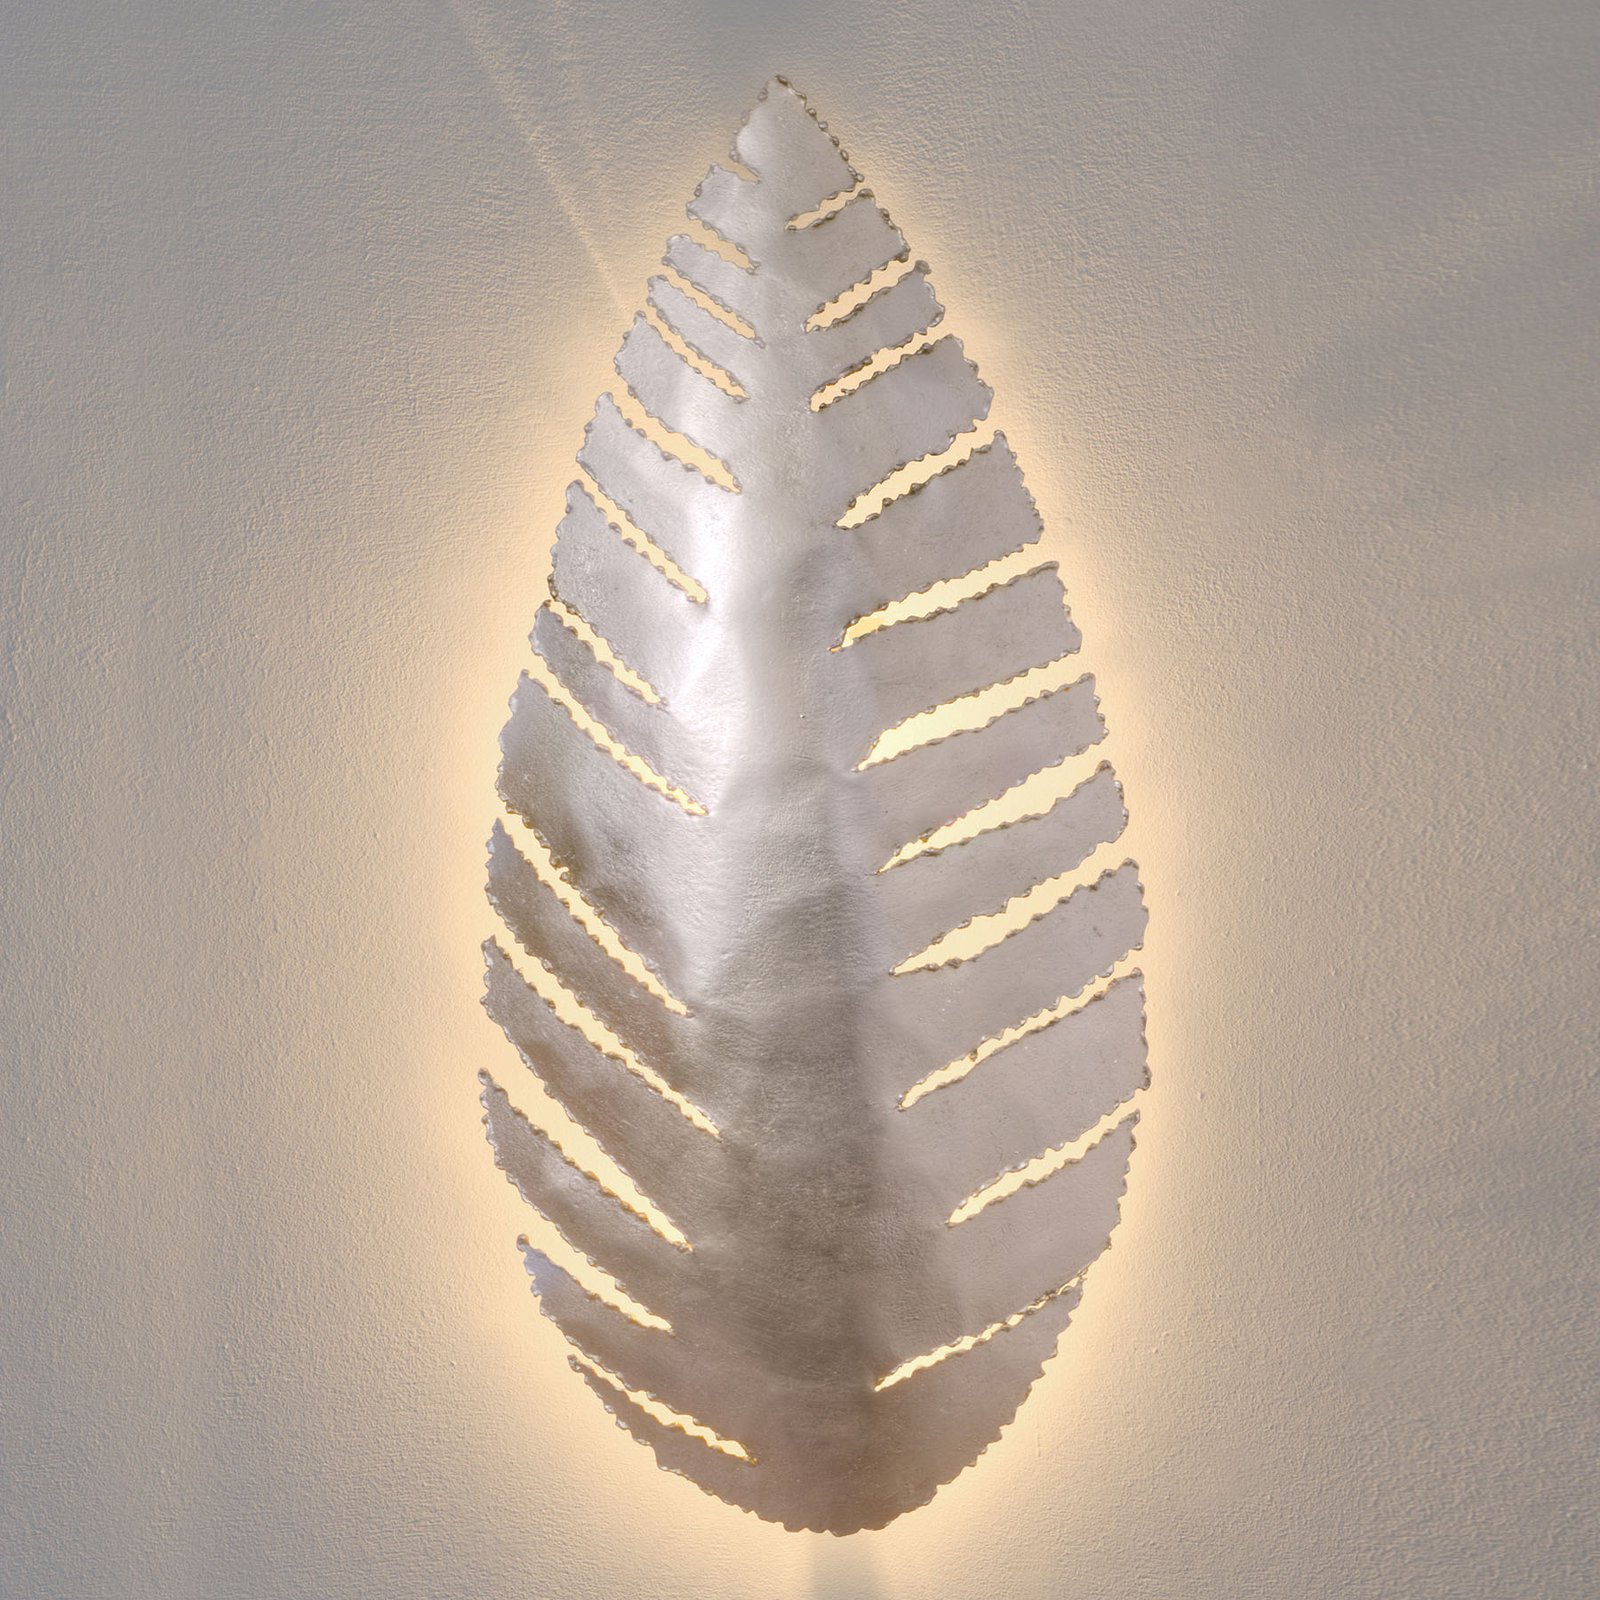 Pietro wall light in leaf form, silver